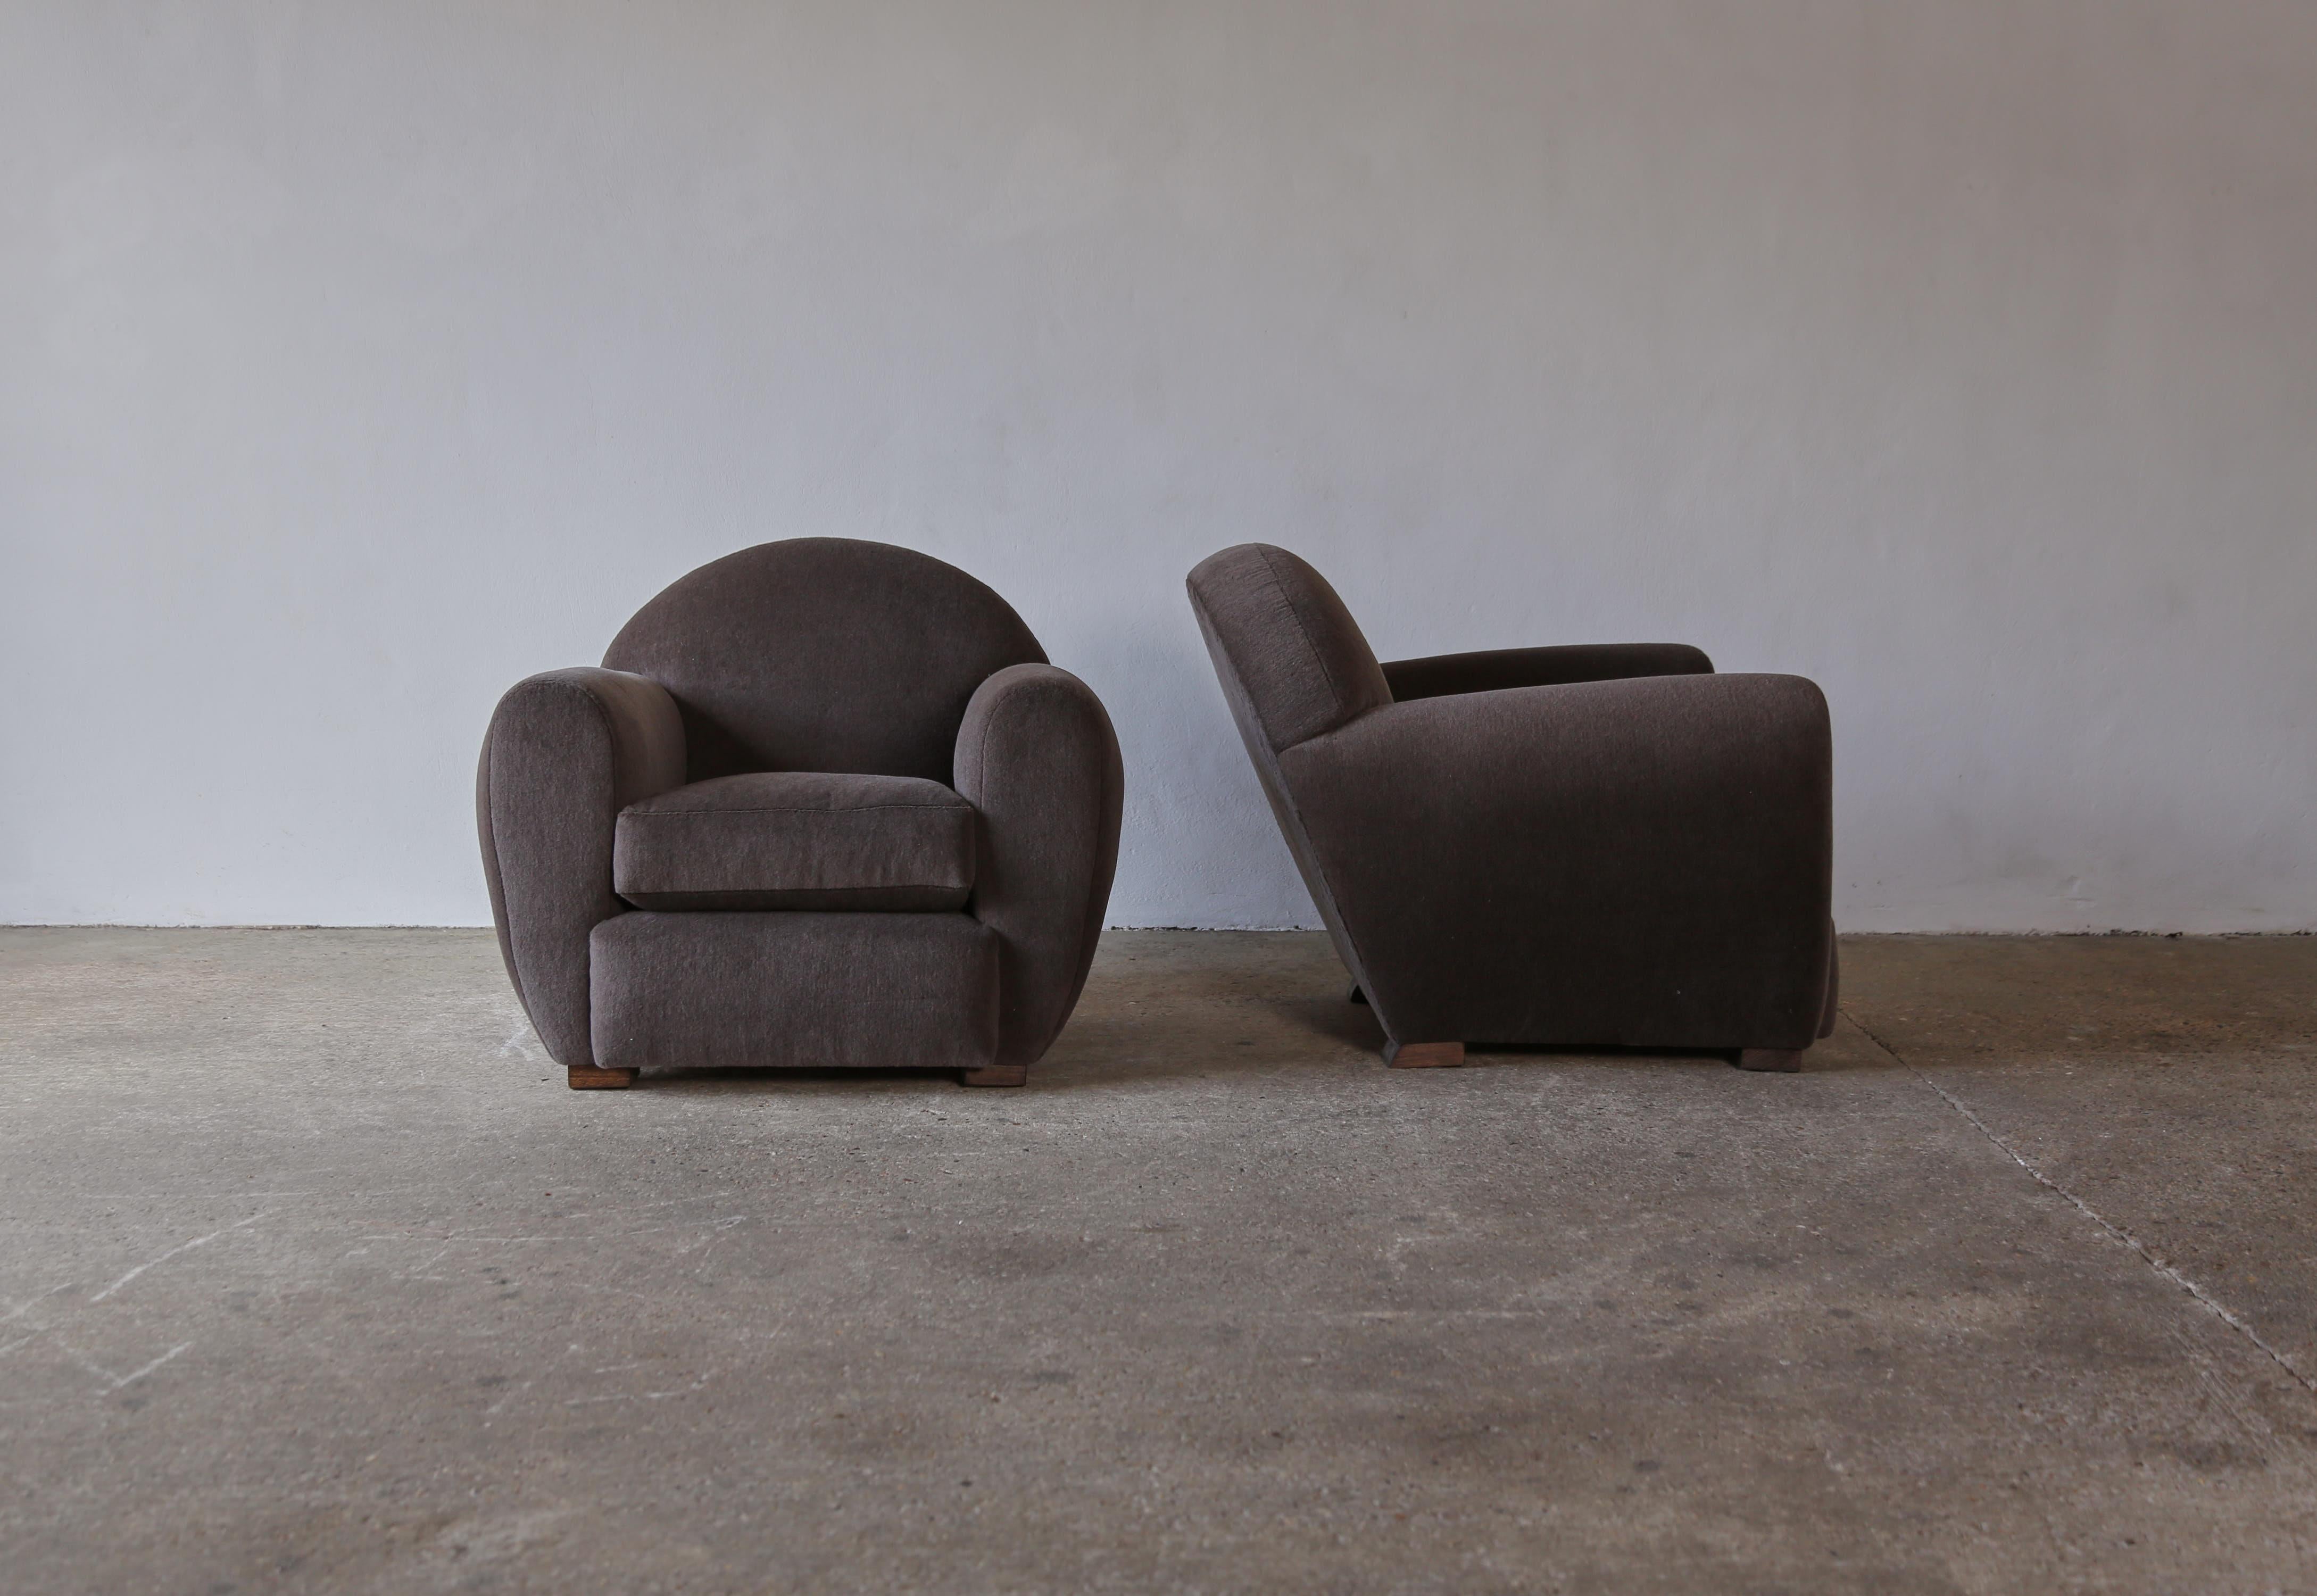 Superb pair of round, leaning modern club chairs, upholstered in pure Alpaca. High quality hand-made beech frames and newly upholstered in a soft, brown/grey premium 100% alpaca fabric. Fast shipping worldwide.

